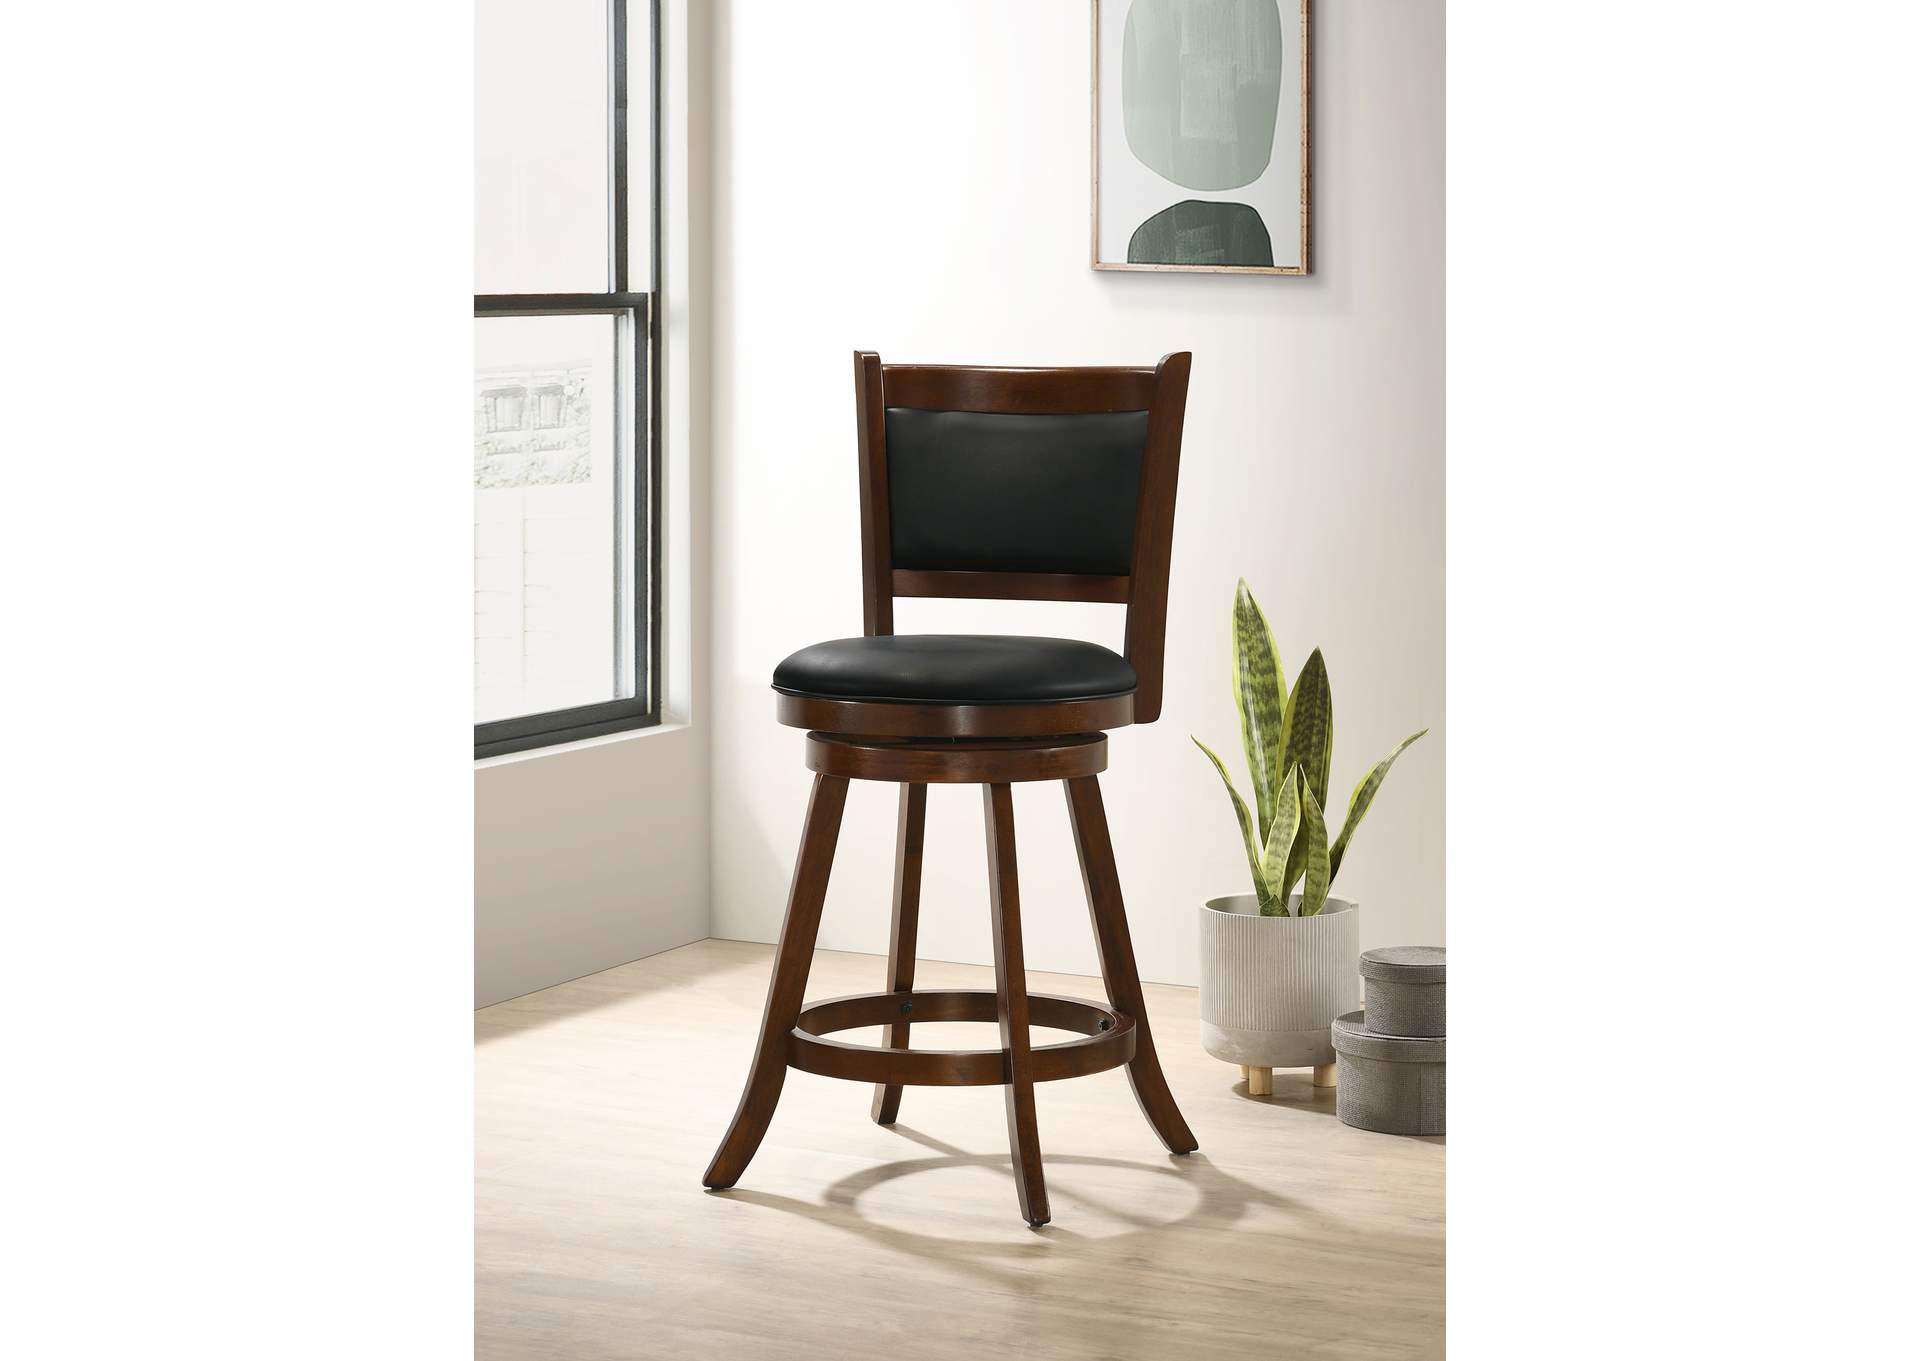 Broxton Upholstered Swivel Counter Height Stools Chestnut and Black (Set of 2),Coaster Furniture